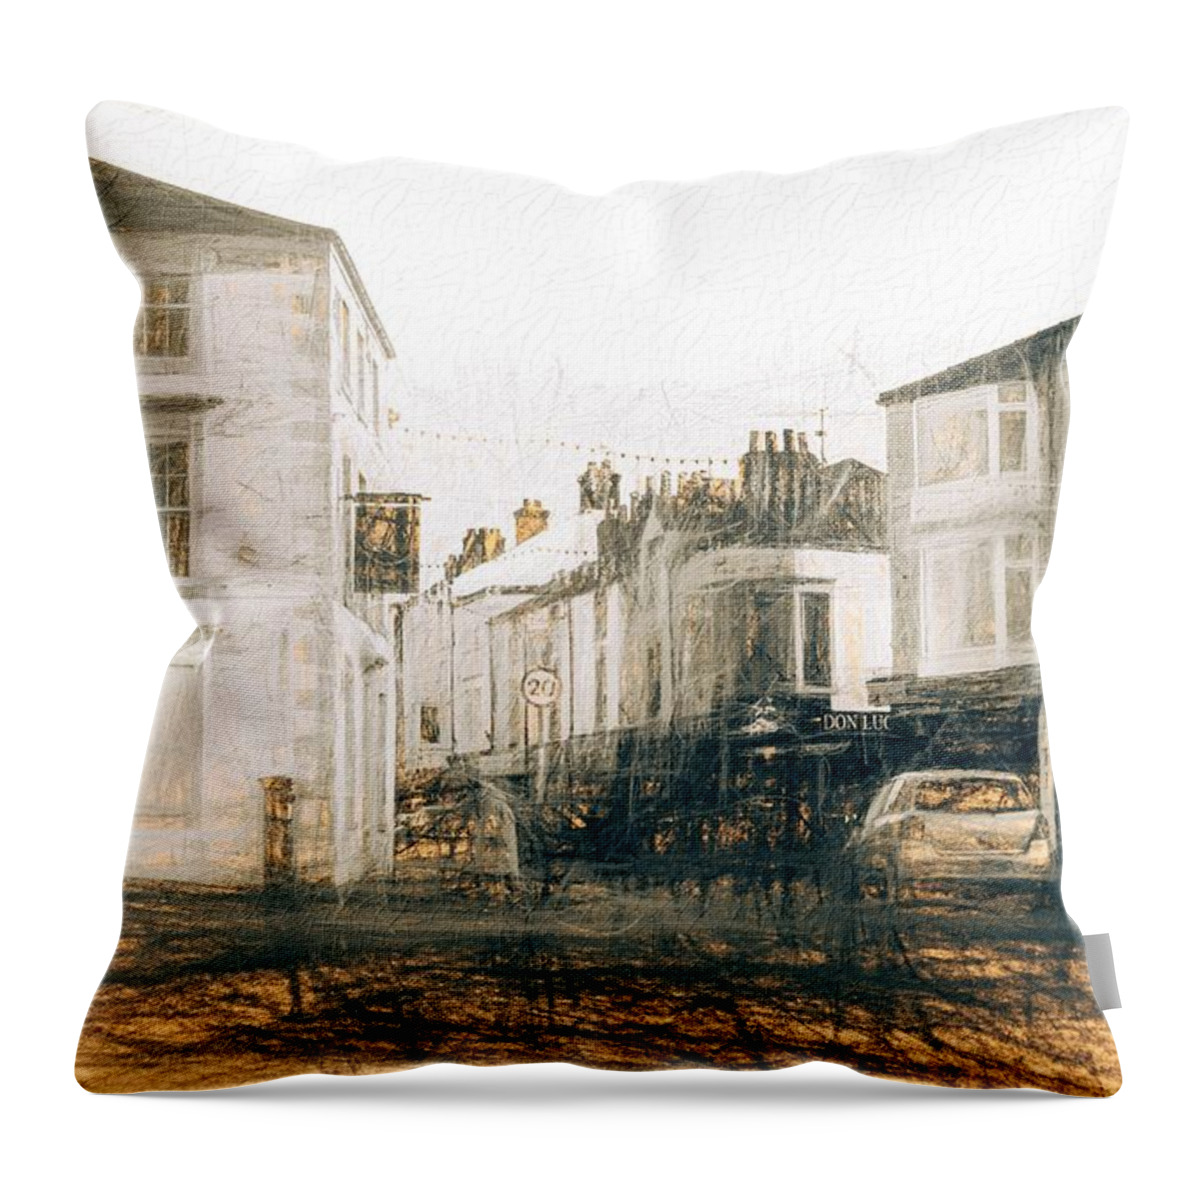 Morecambe Throw Pillow featuring the photograph Morecambe Street Number 1 by David Ridley